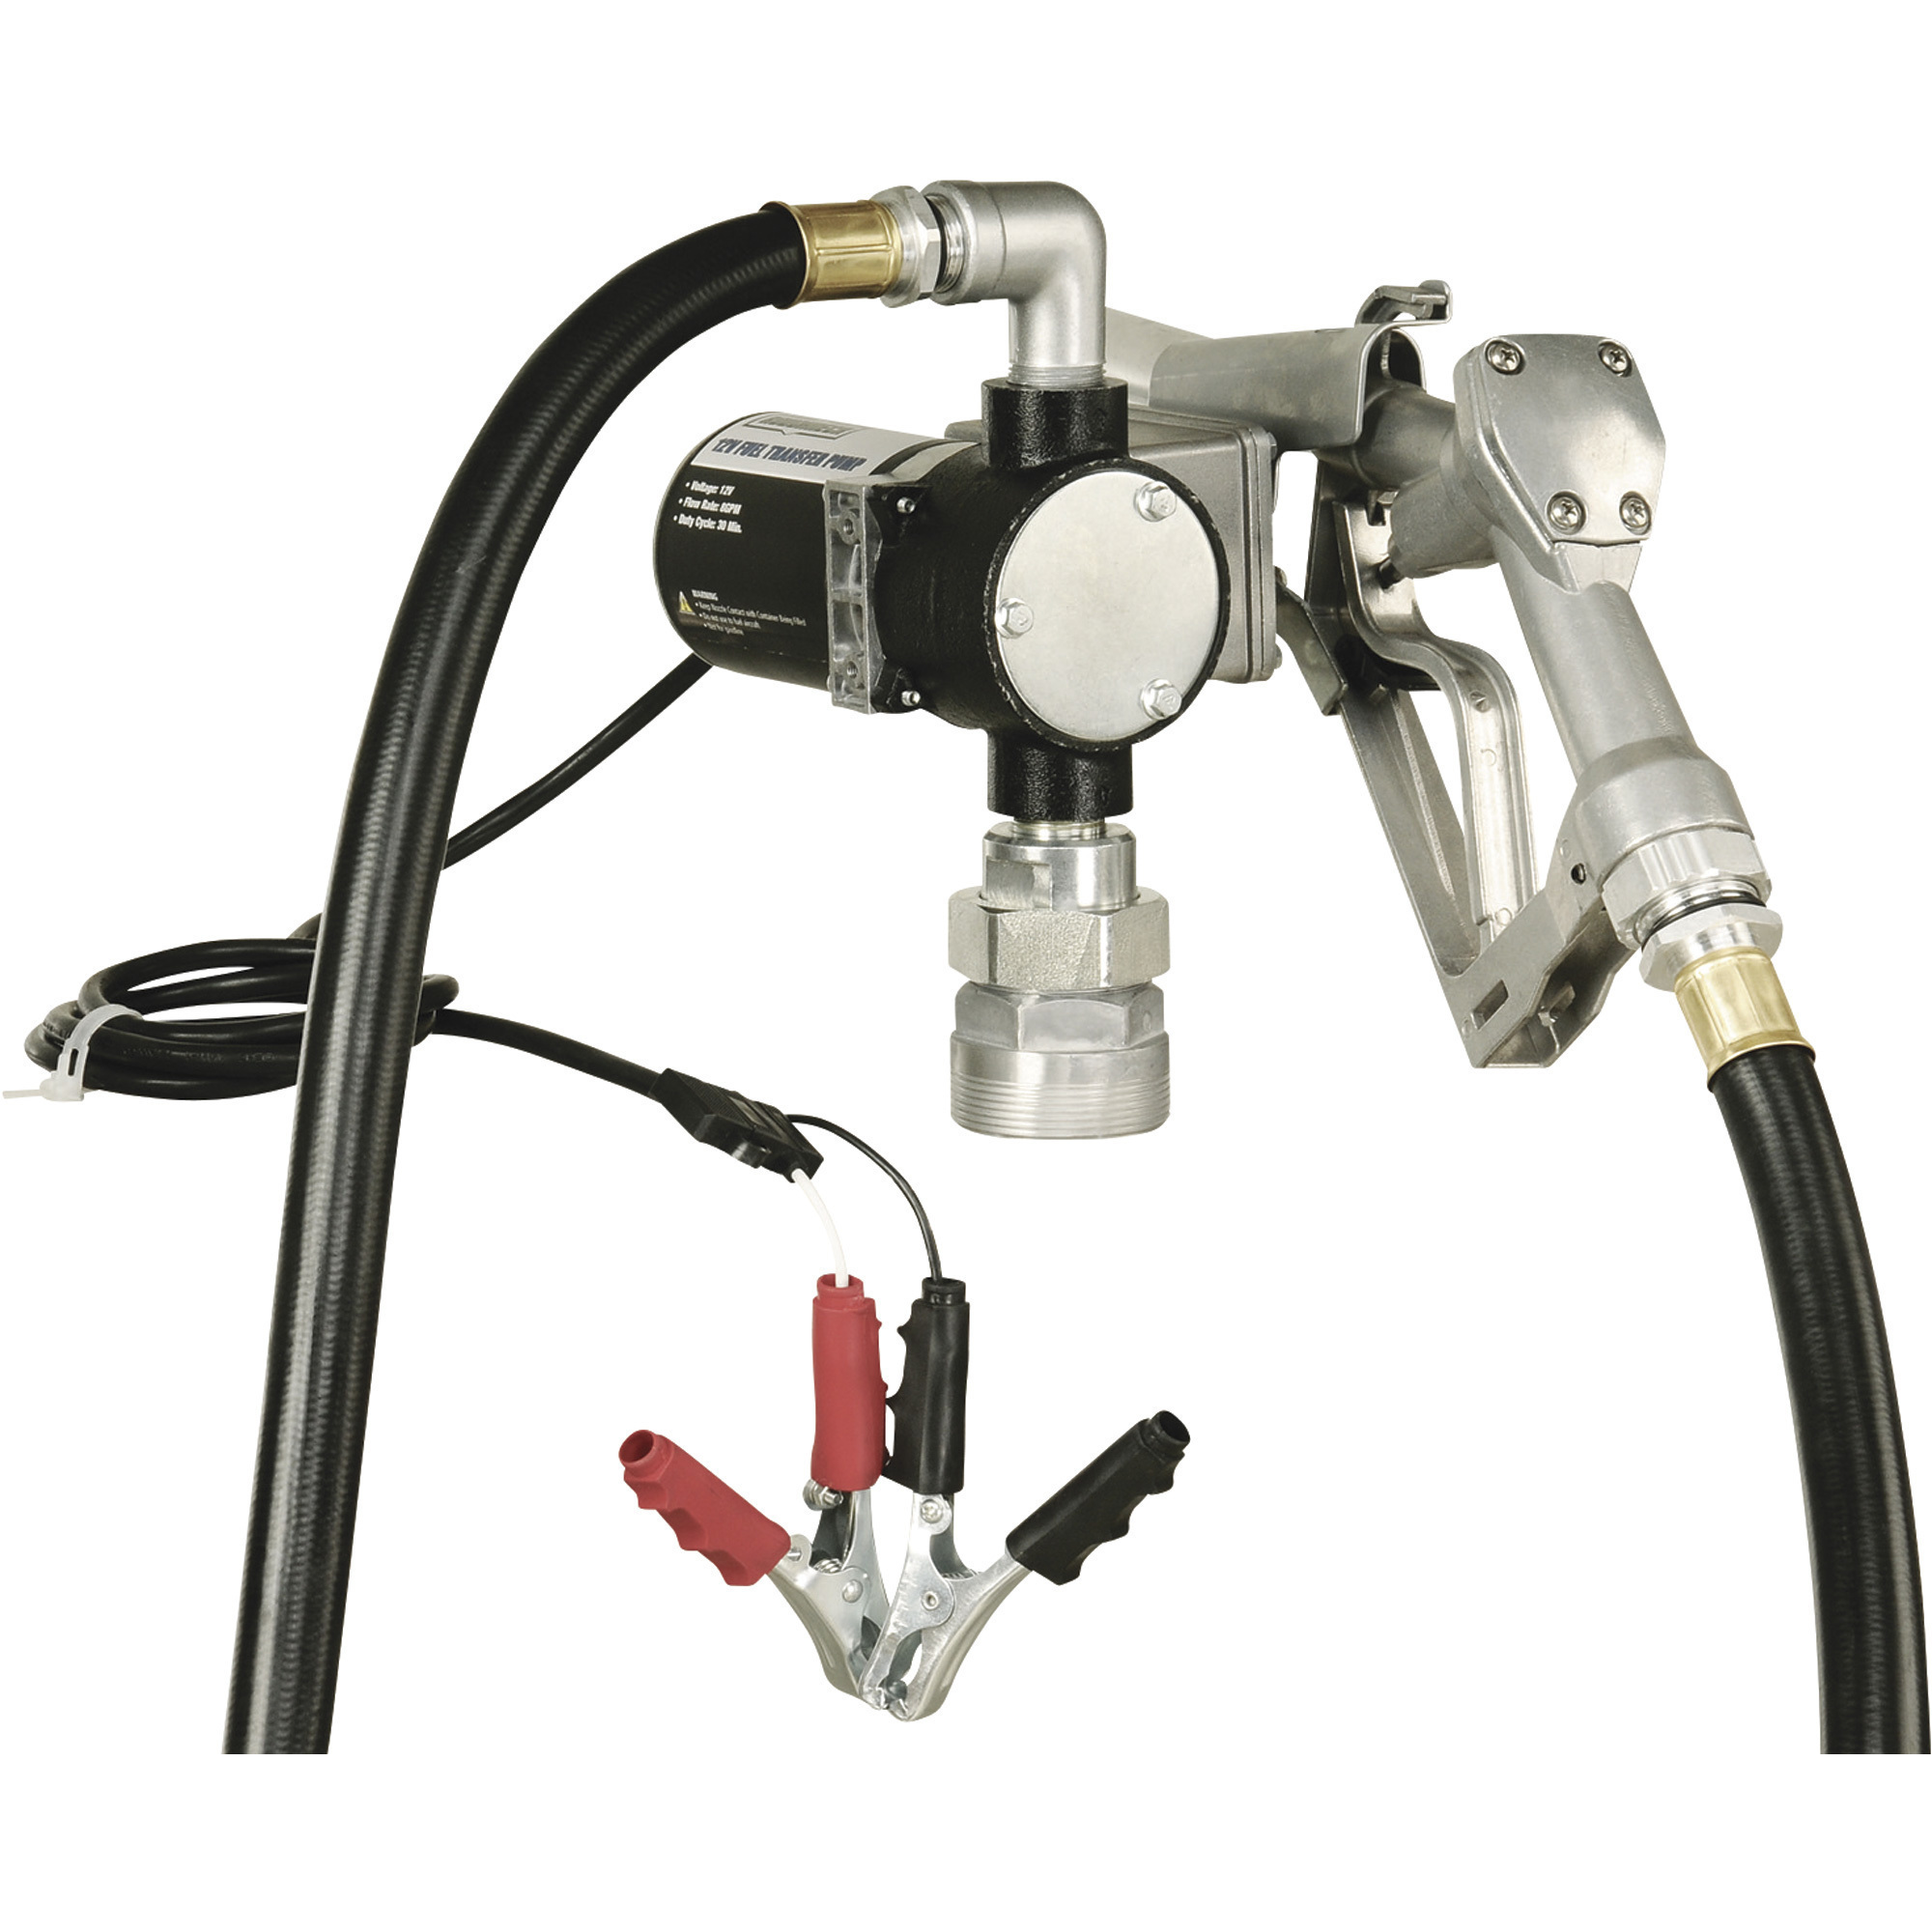 Northern Industrial Diesel Fuel and Oil Transfer Pump — 12 Volt DC